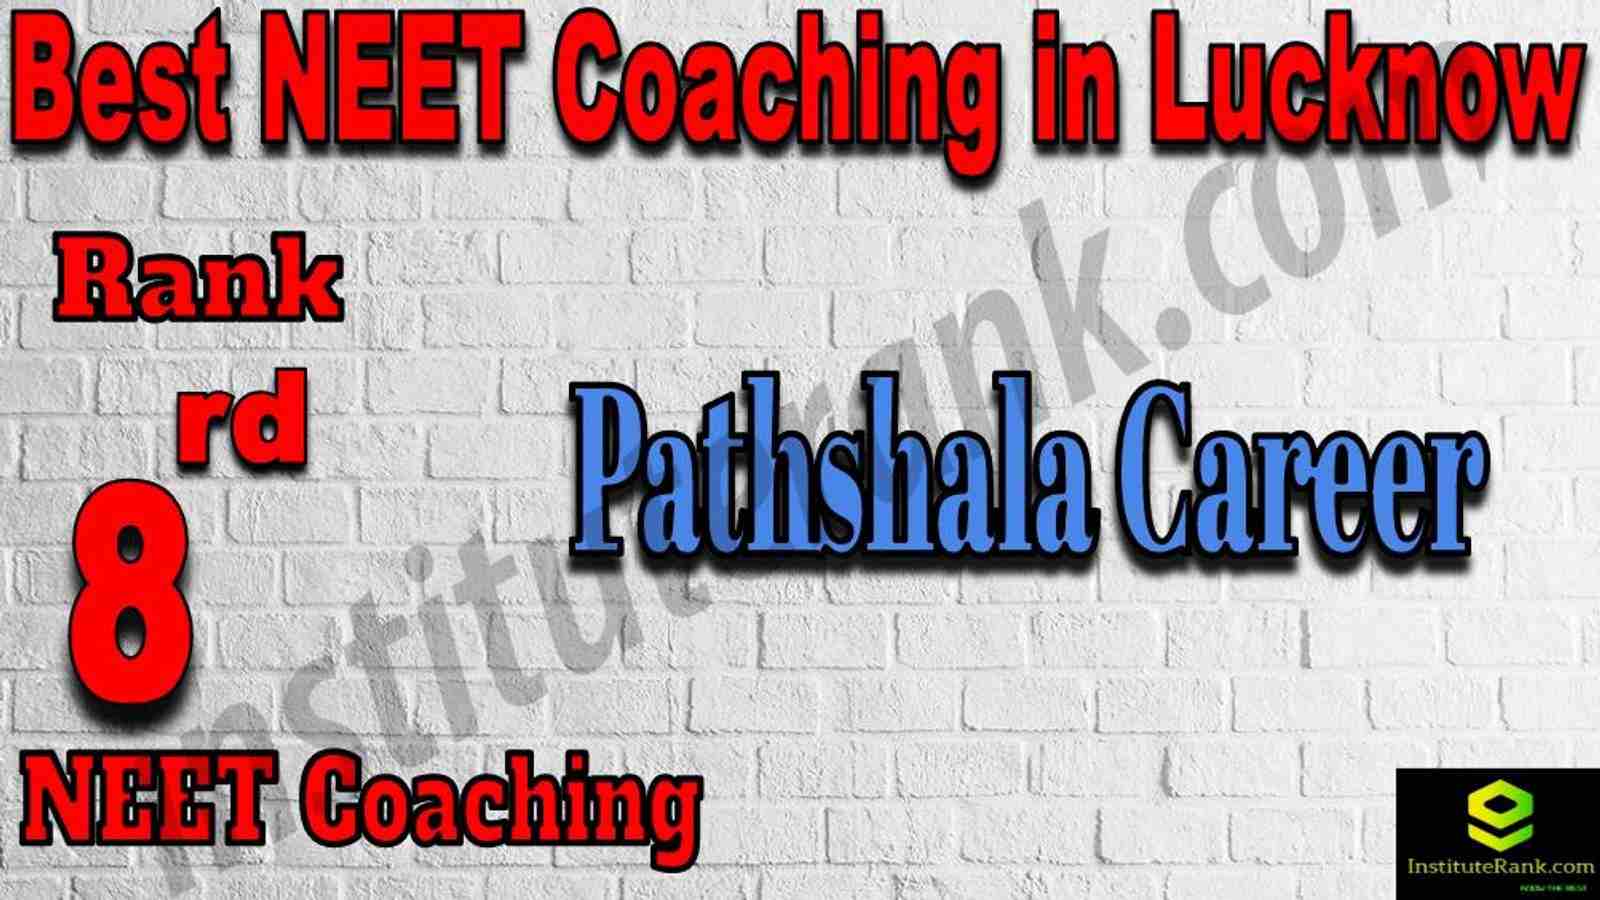 8th Best Neet Coaching in Lucknow